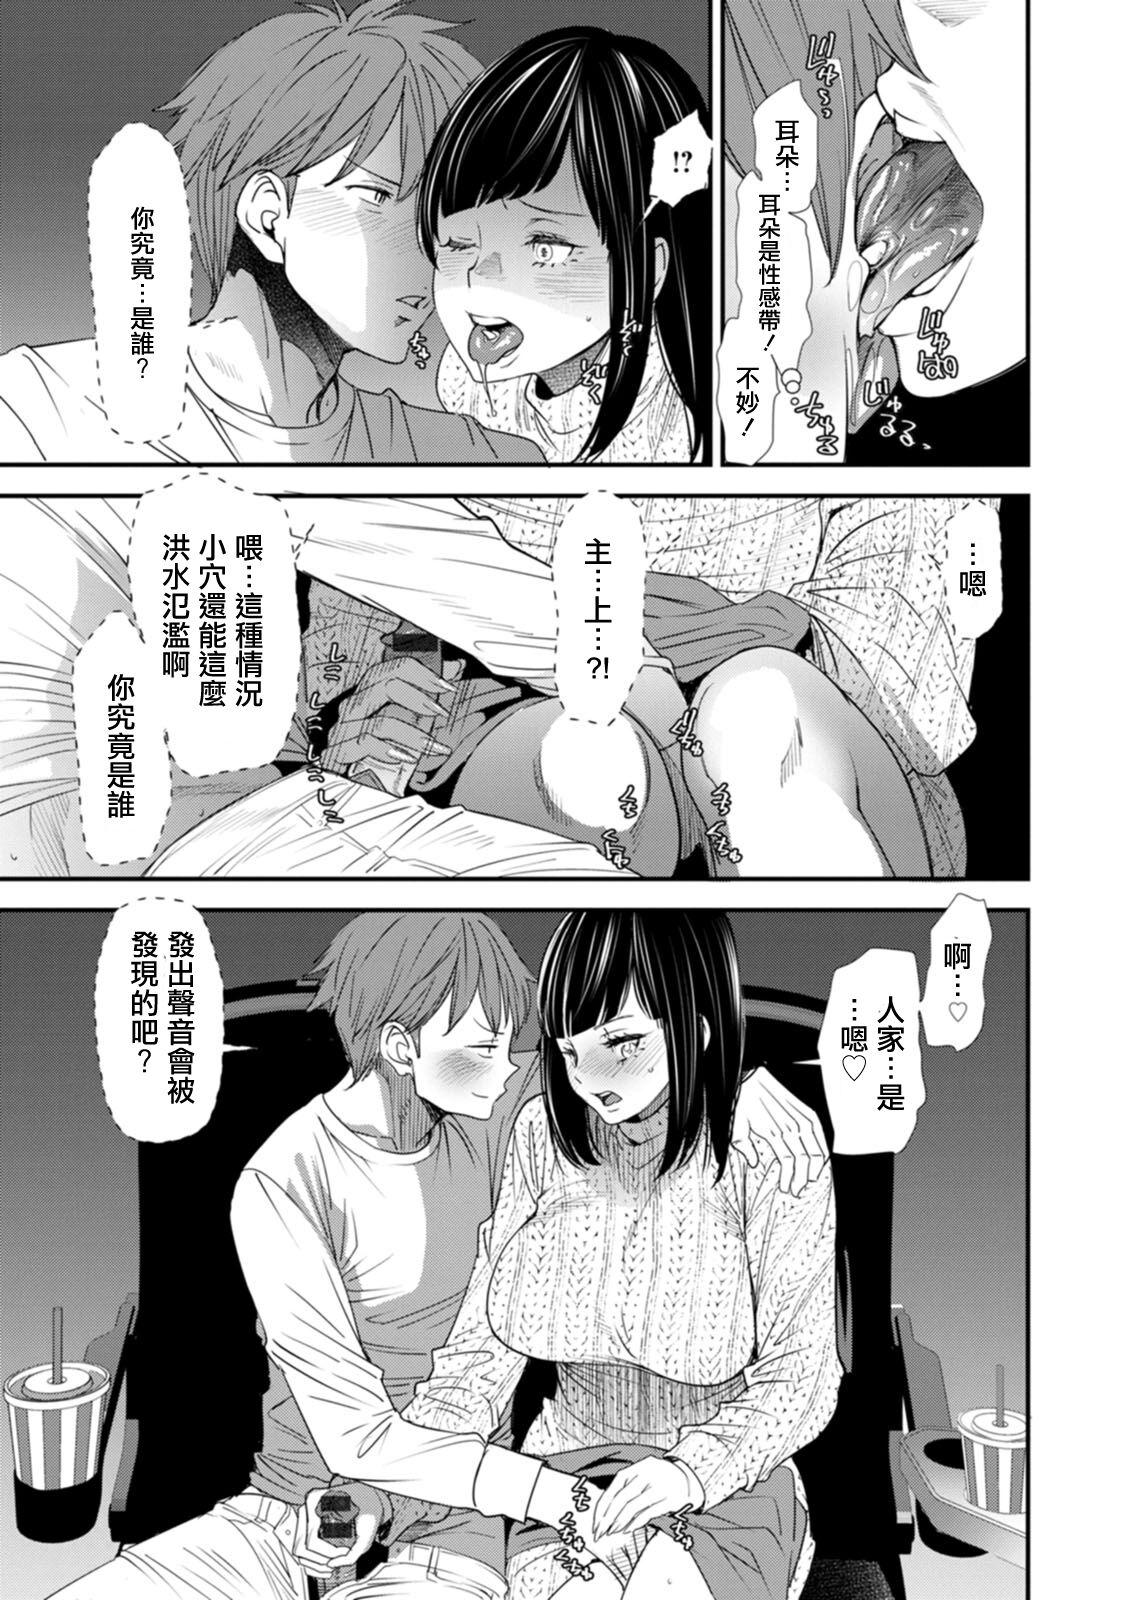 Interracial Inma Joshi Daisei no Yuuutsu - The Melancholy of the Succubus who is a college student Ch. 5 Big Booty - Page 9